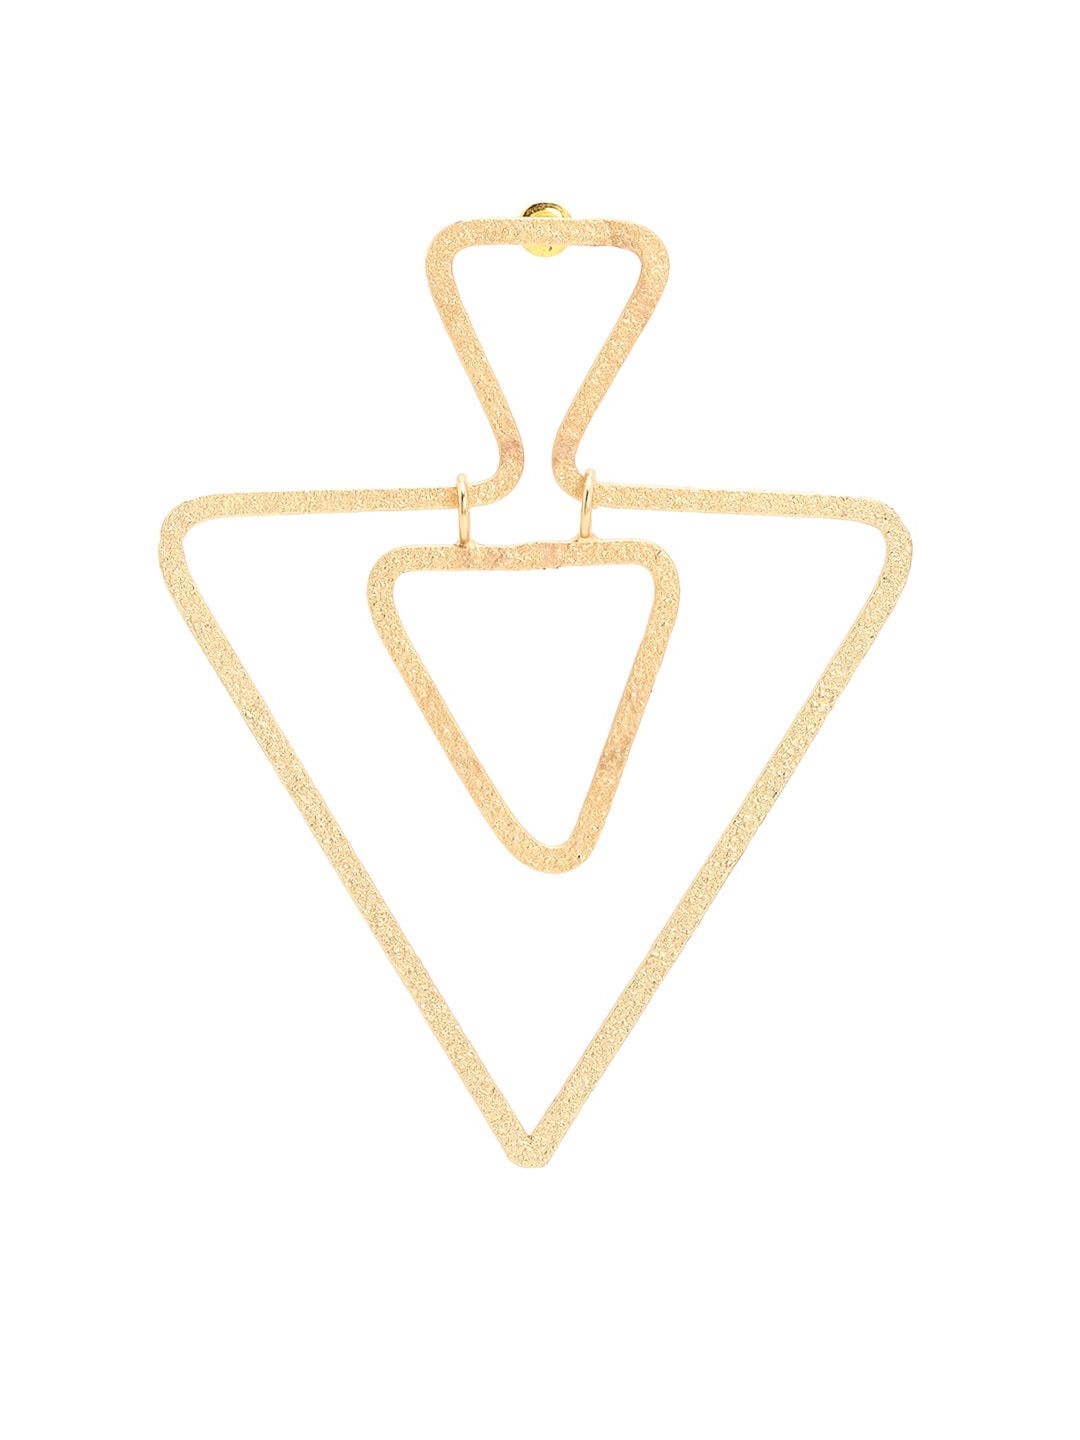 FOREVER 21 Gold Contemporary Drop Earrings Price in India